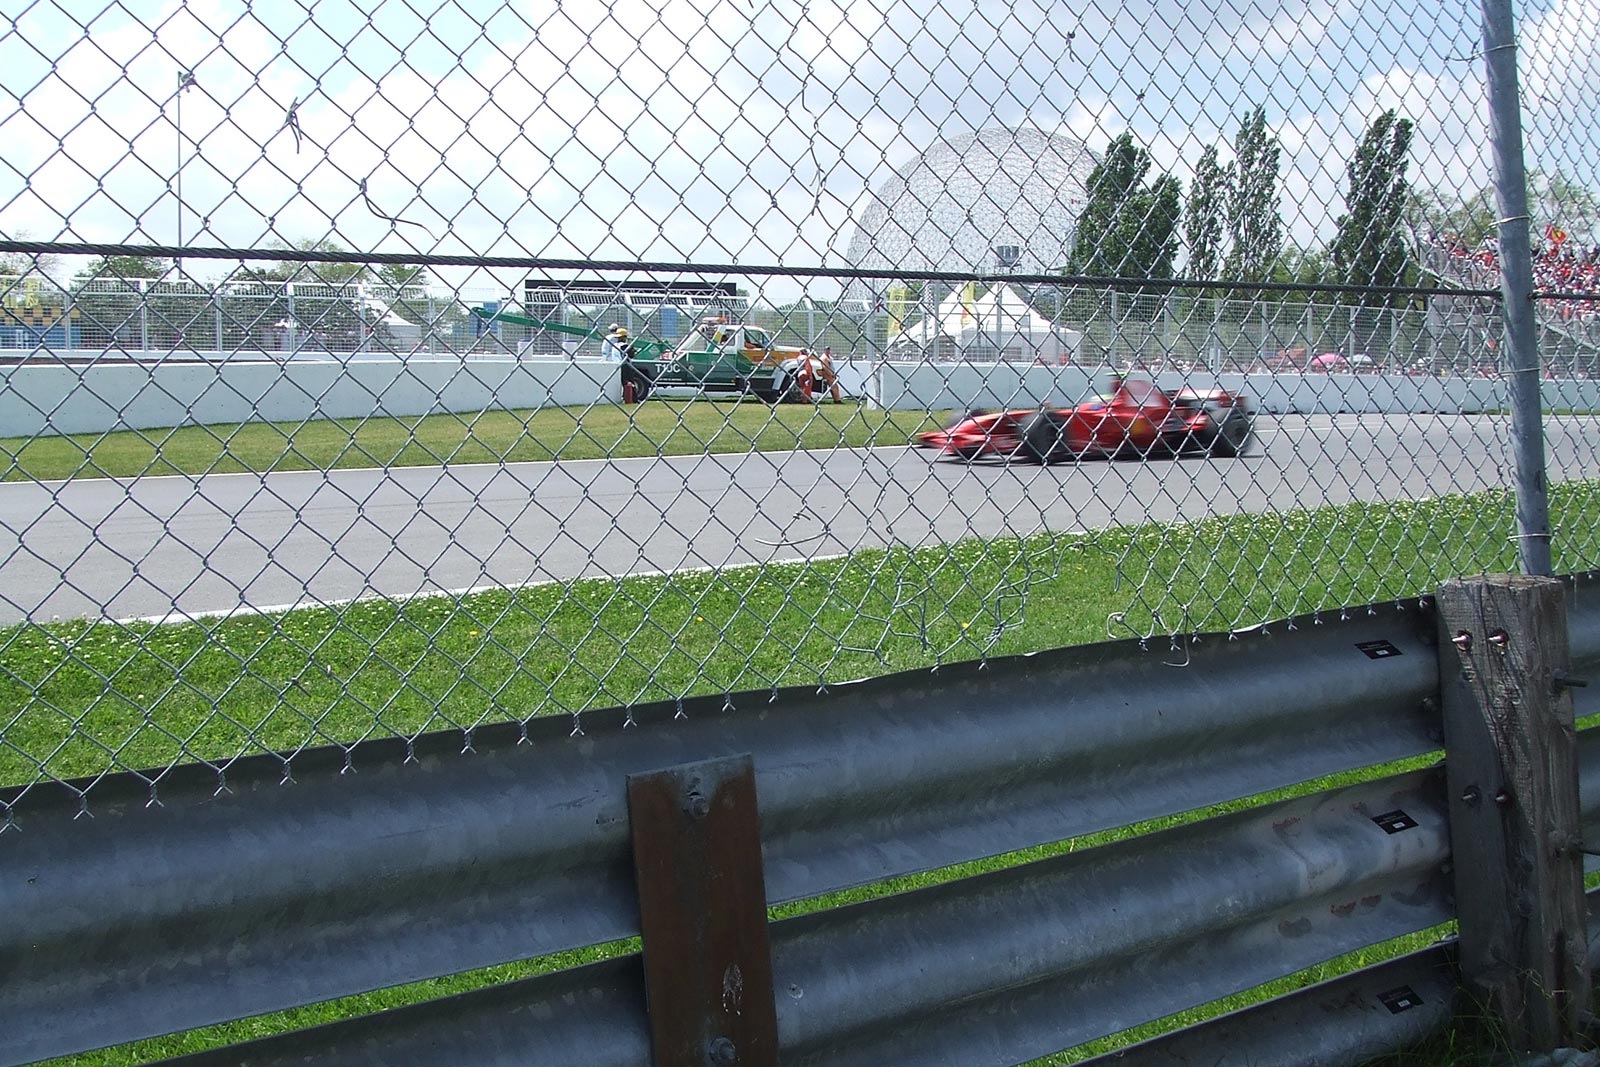 F1 race in Montreal. F1 in Montreal